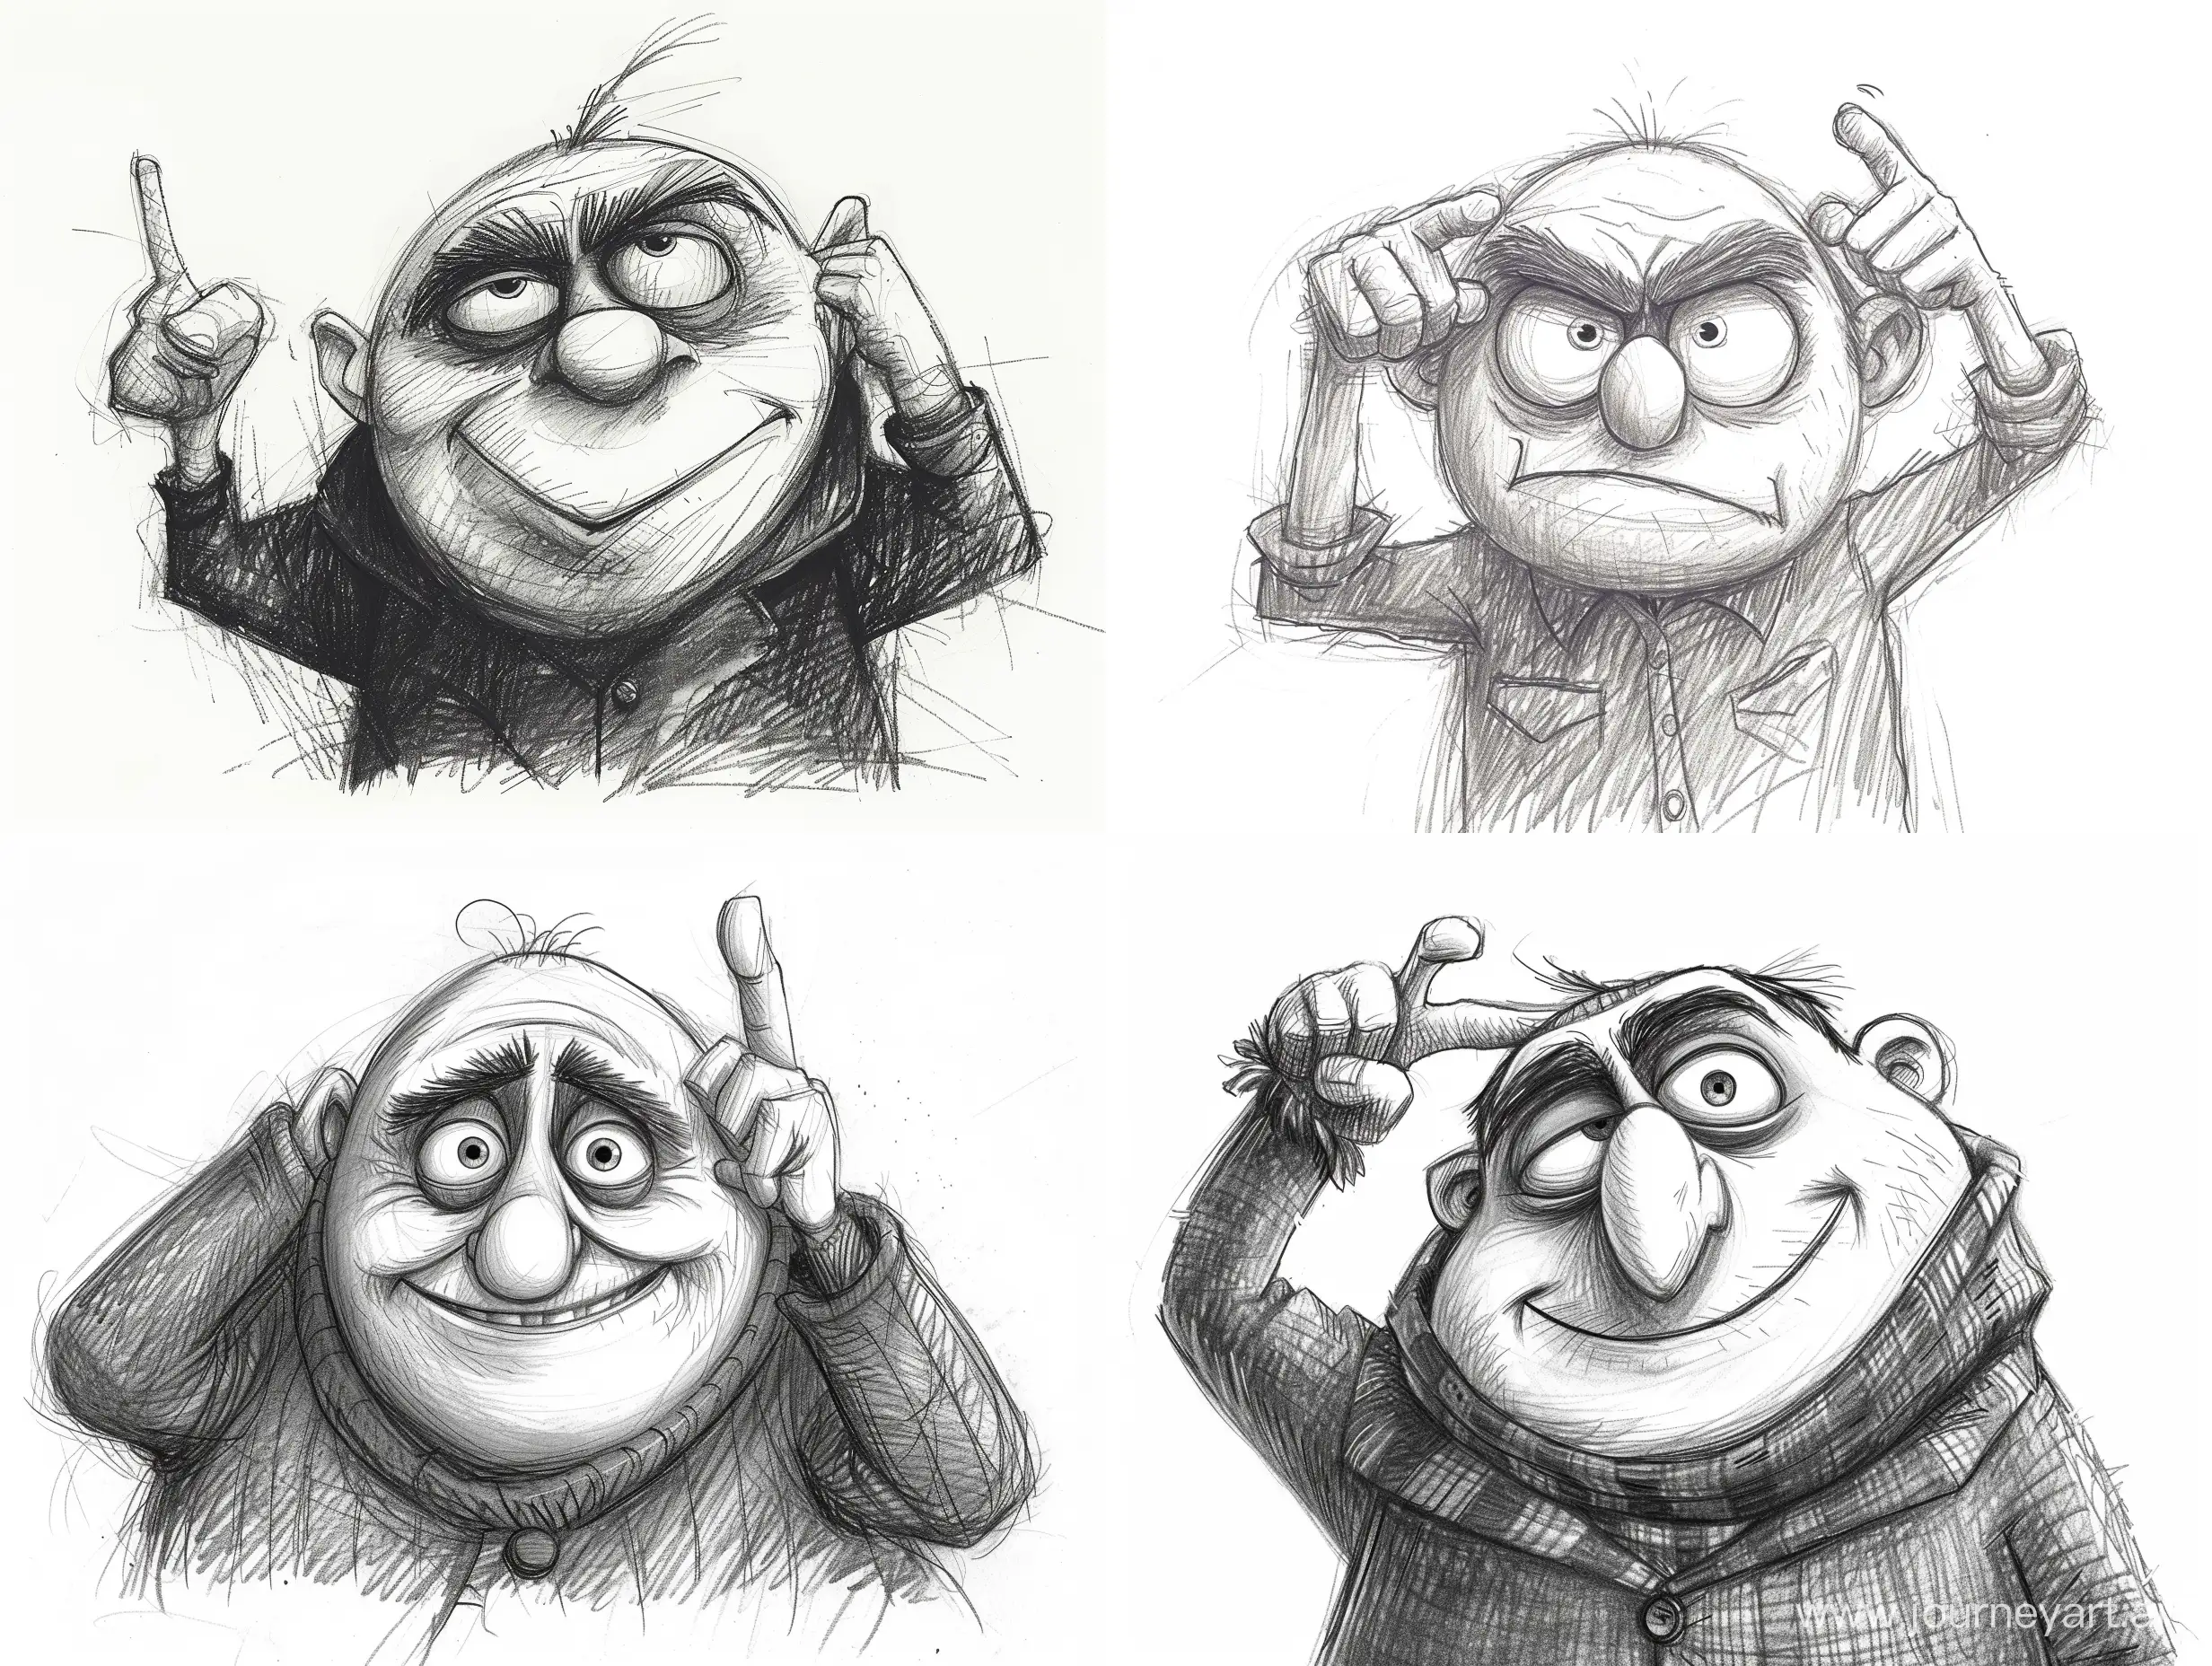 Confident-Gru-Gesturing-with-Storyboard-Pencil-Drawing-Style